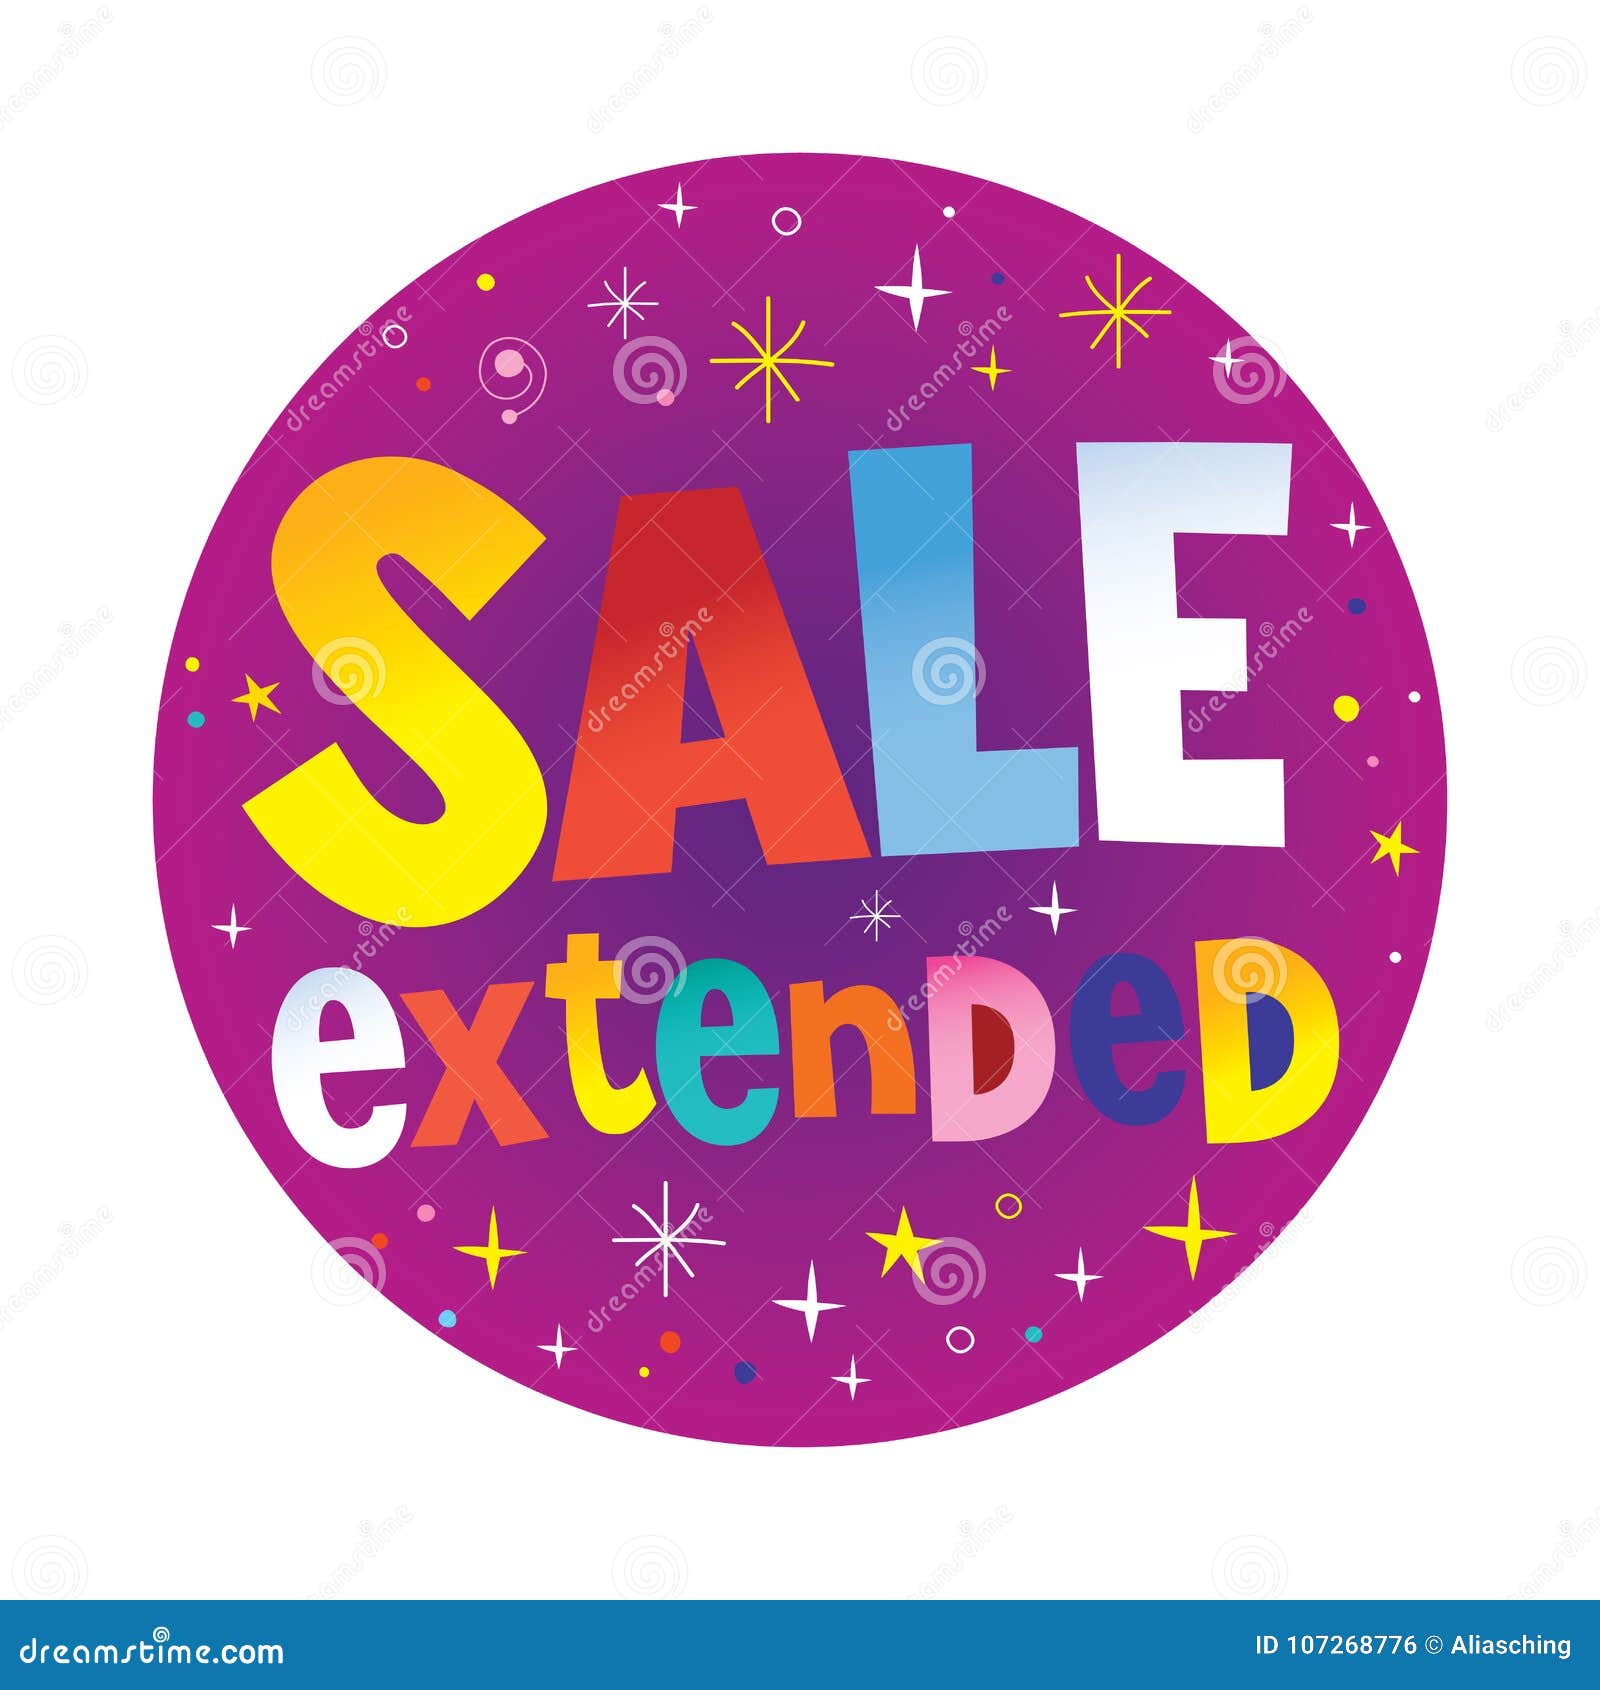 sale extended circle banner poster